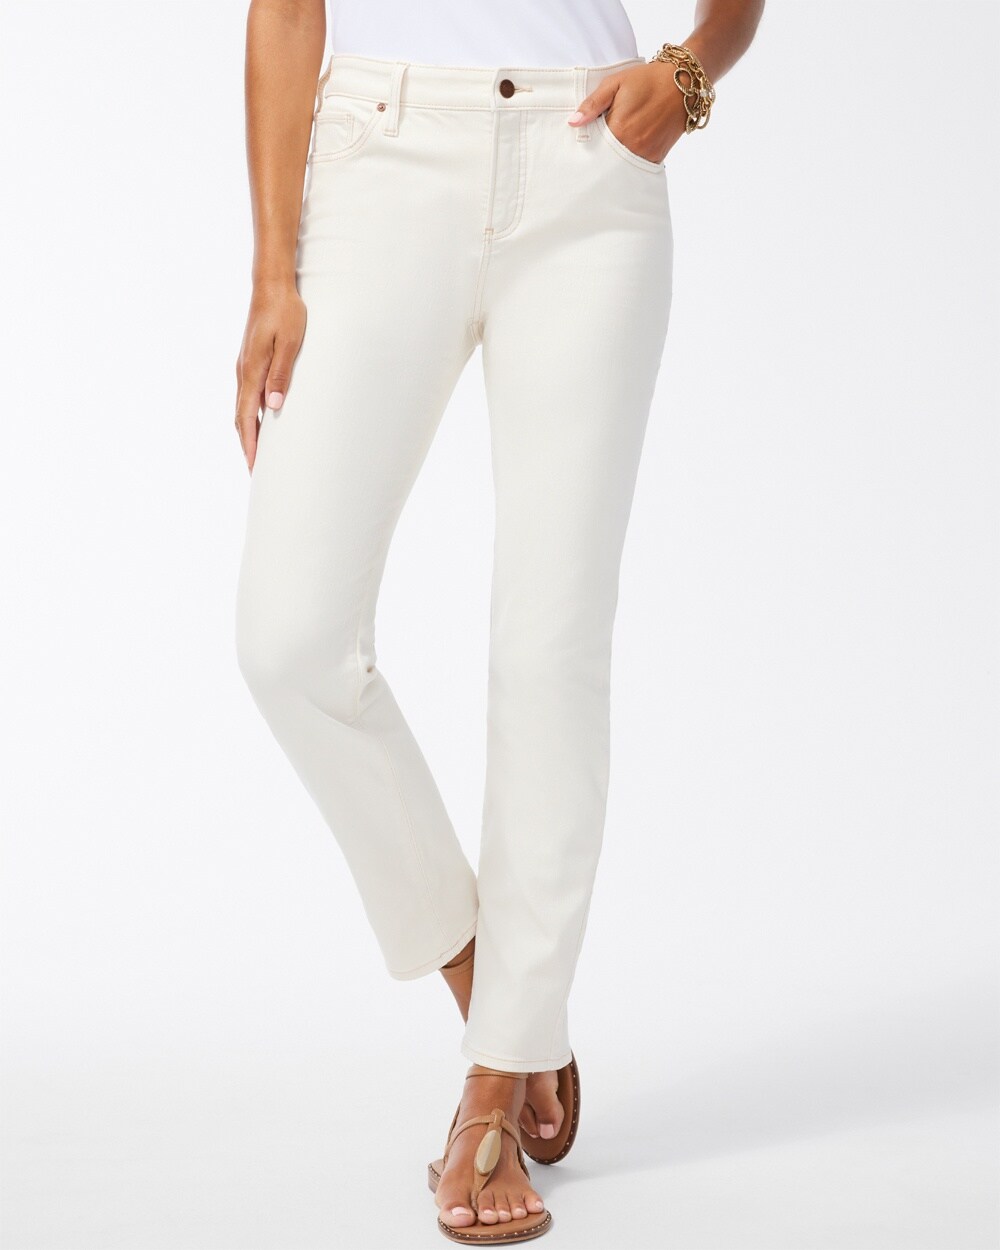 So Slimming\u00A0Girlfriend Ankle Jeans - Chico's